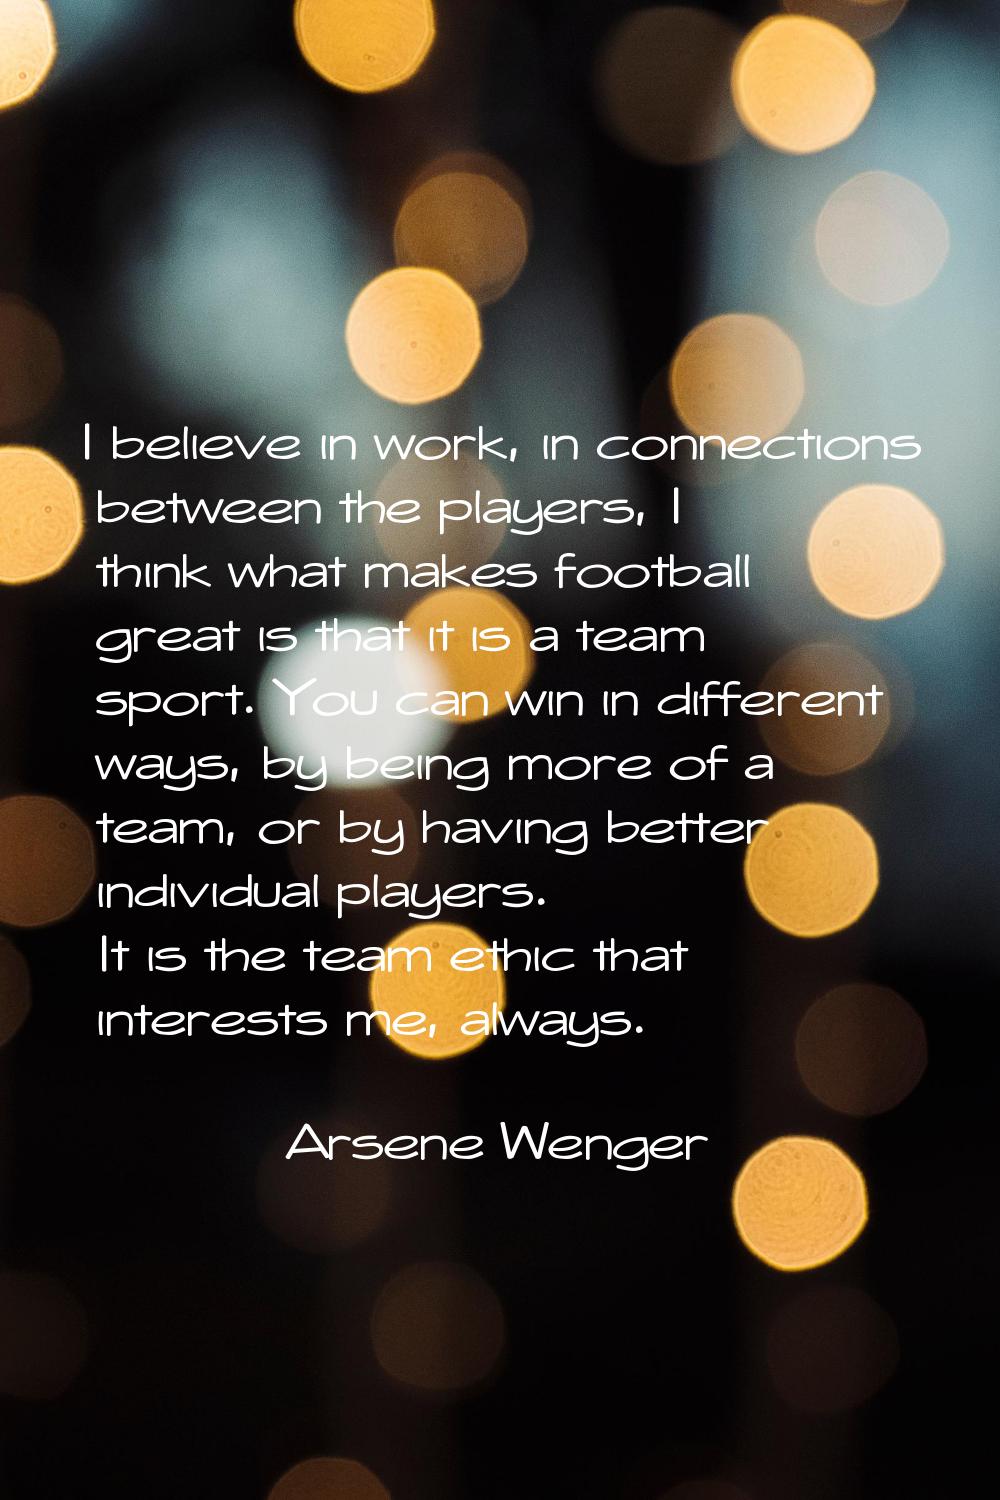 I believe in work, in connections between the players, I think what makes football great is that it